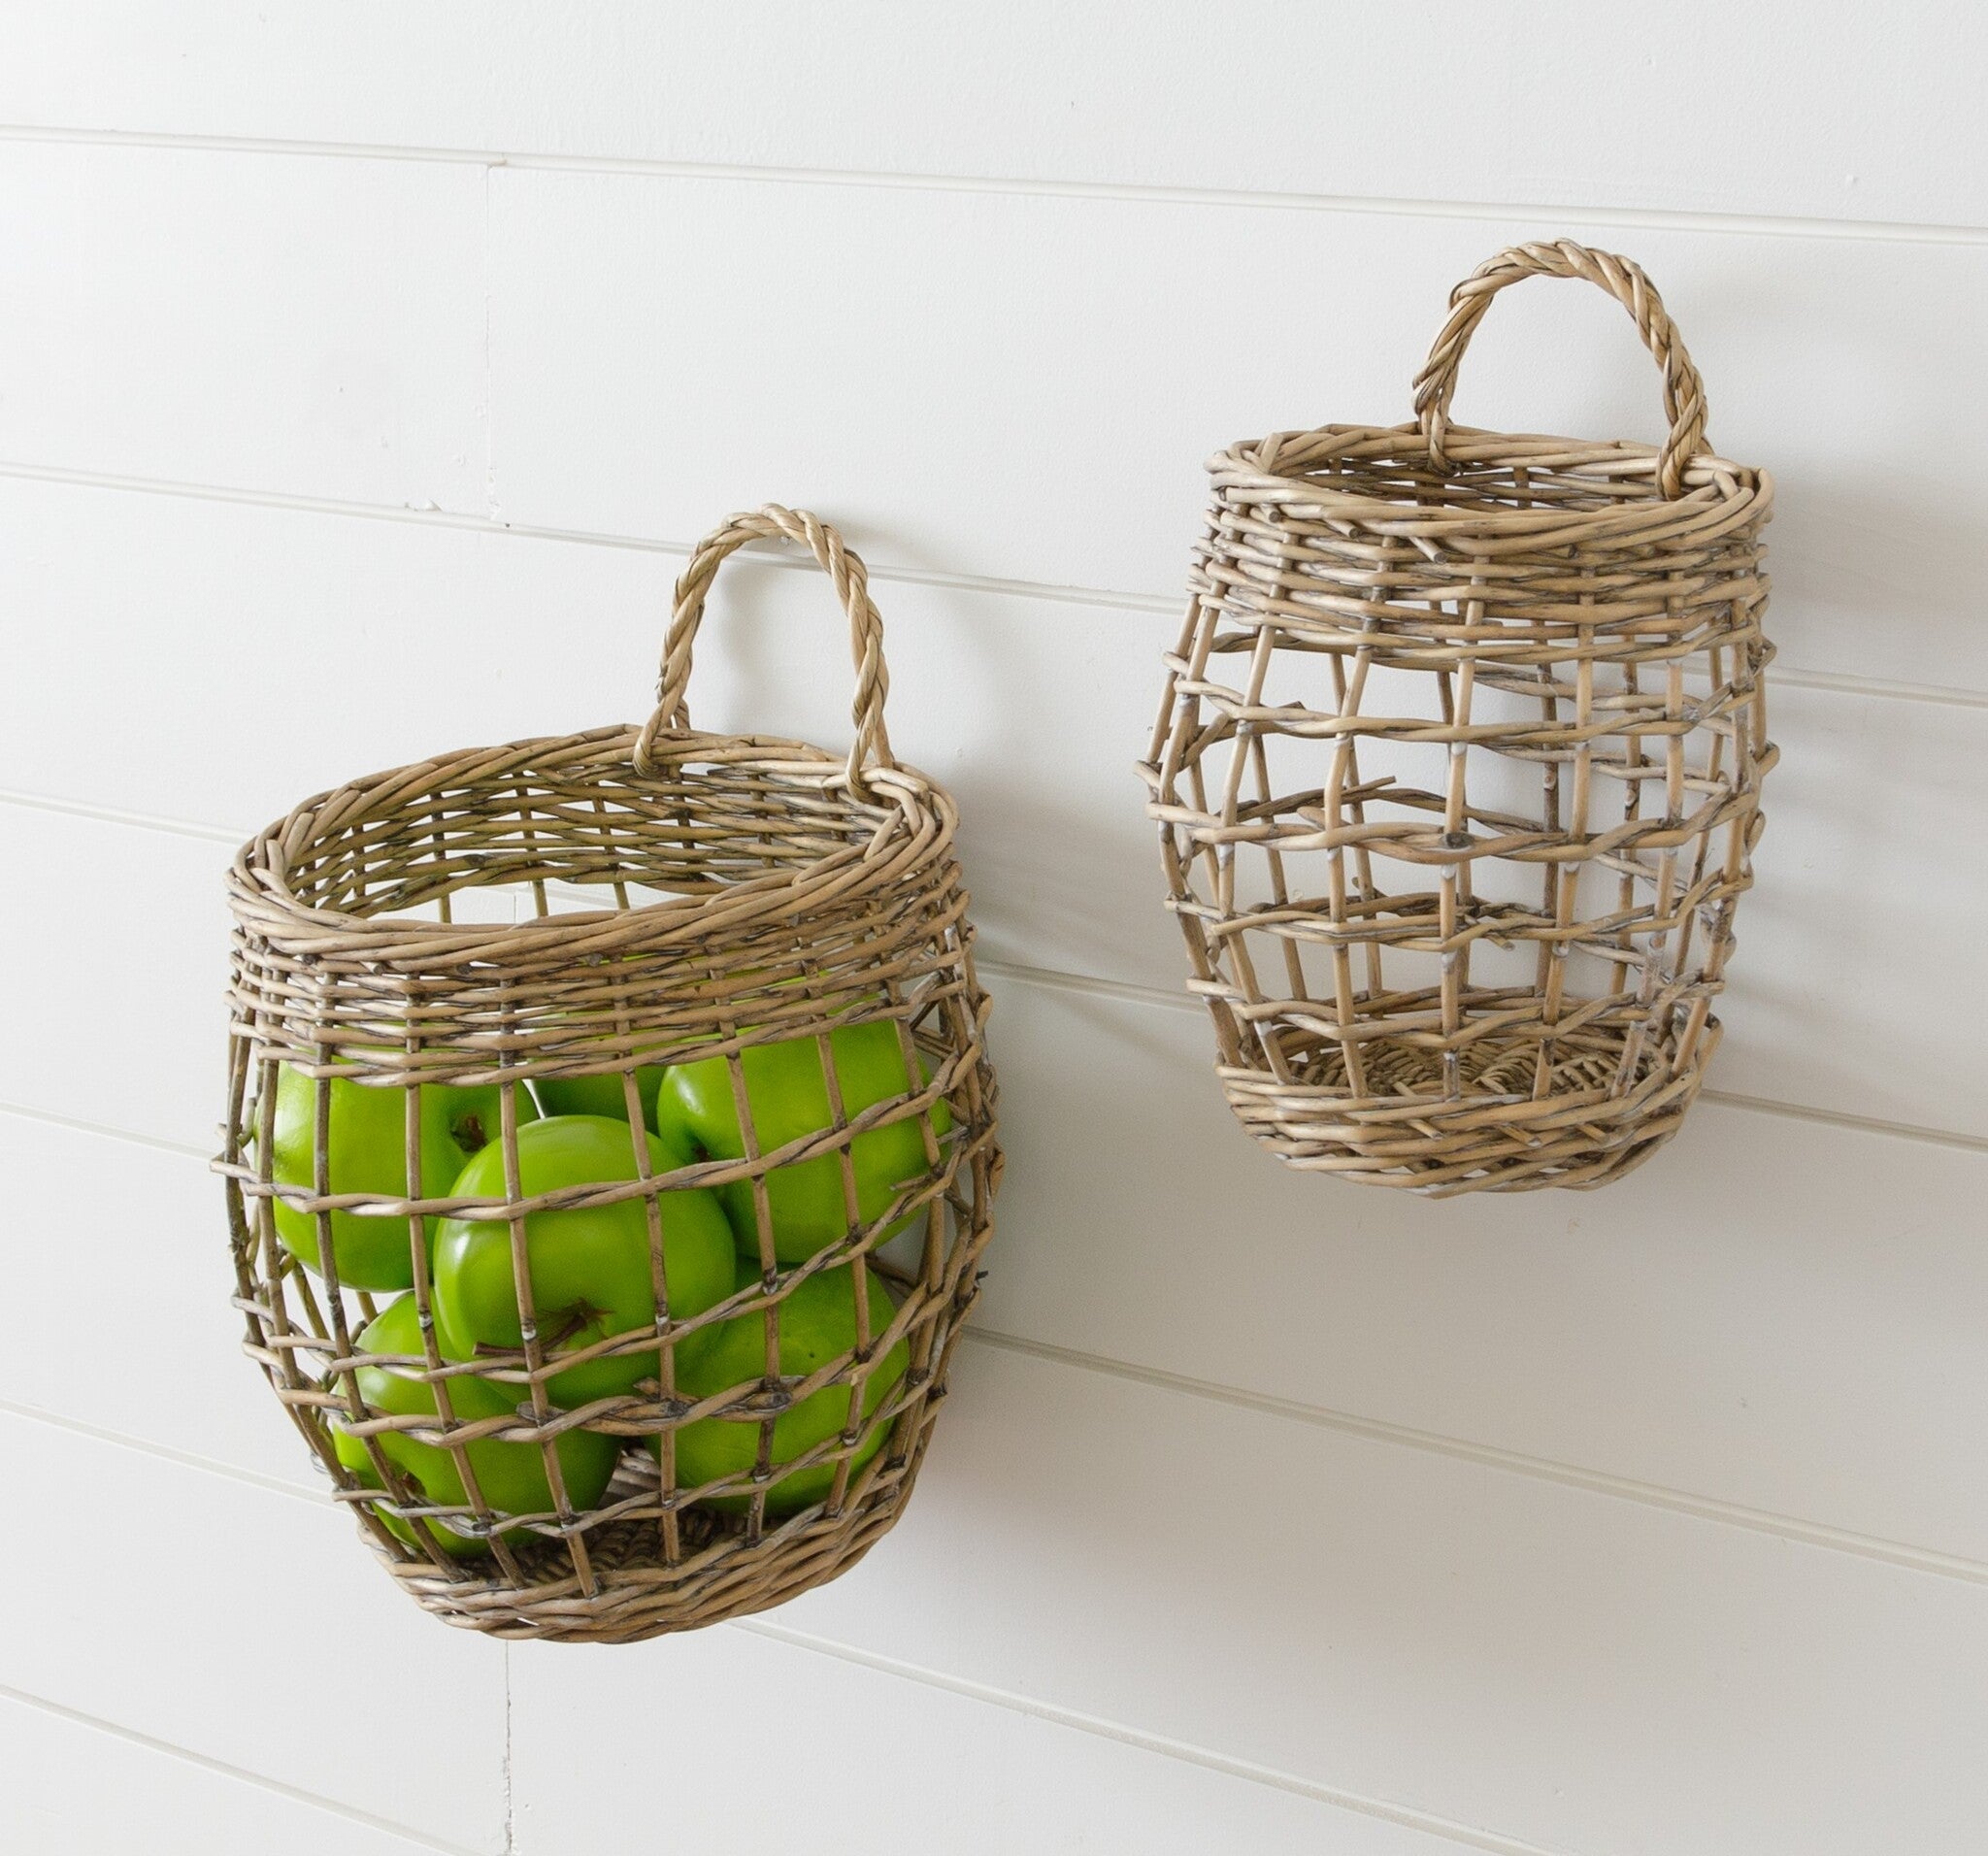 Open Weave Hanging Willow Baskets (S/2)